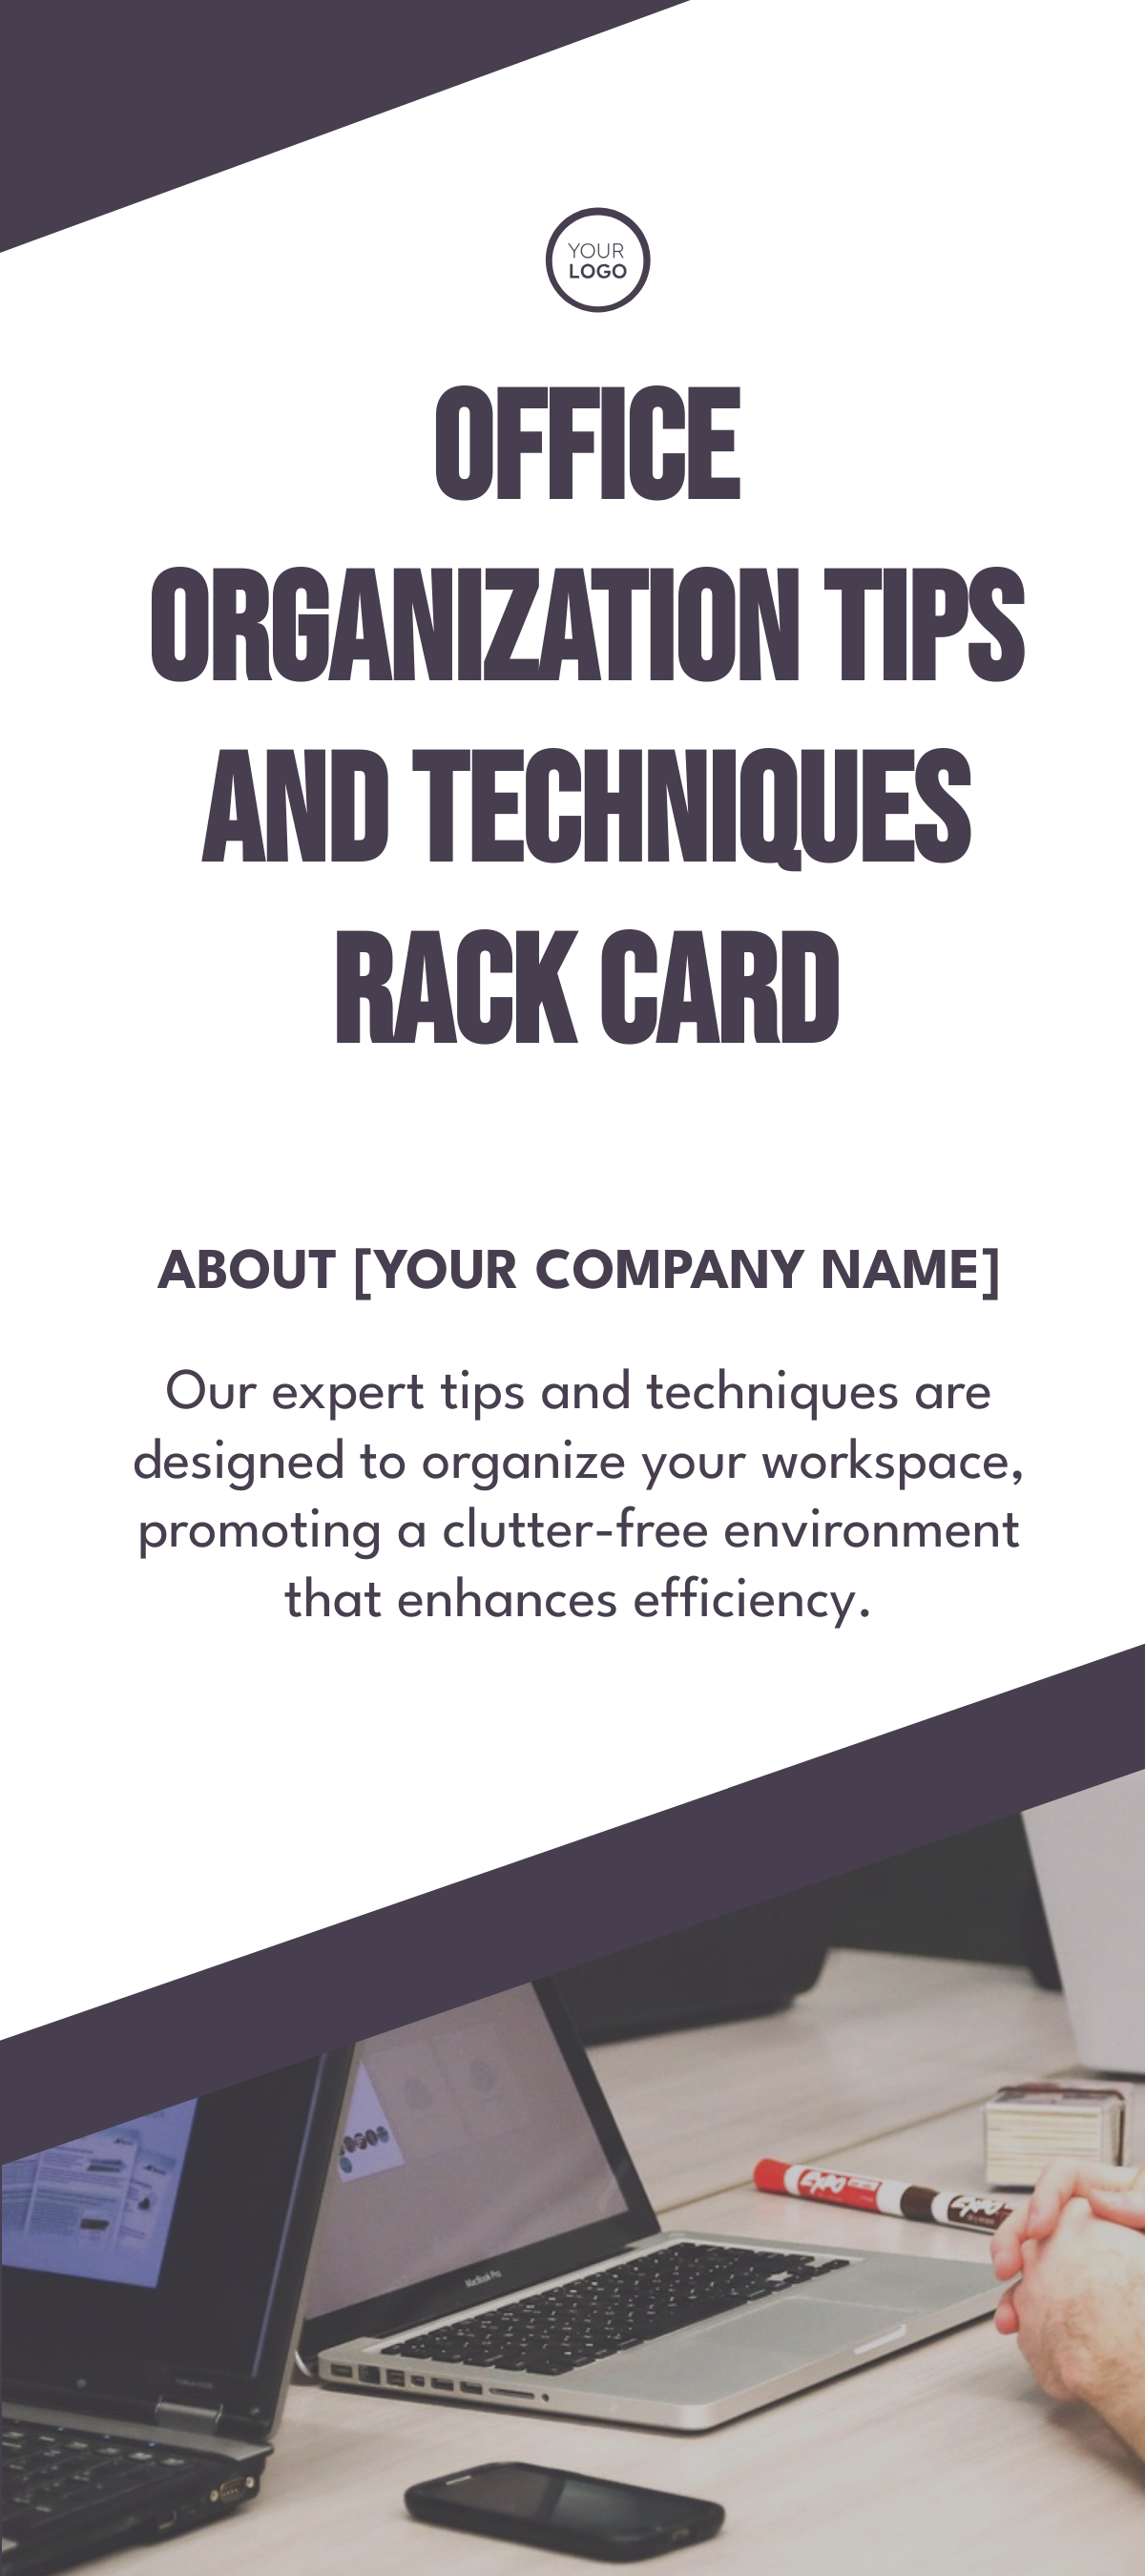 Office Organization Tips and Techniques Rack Card